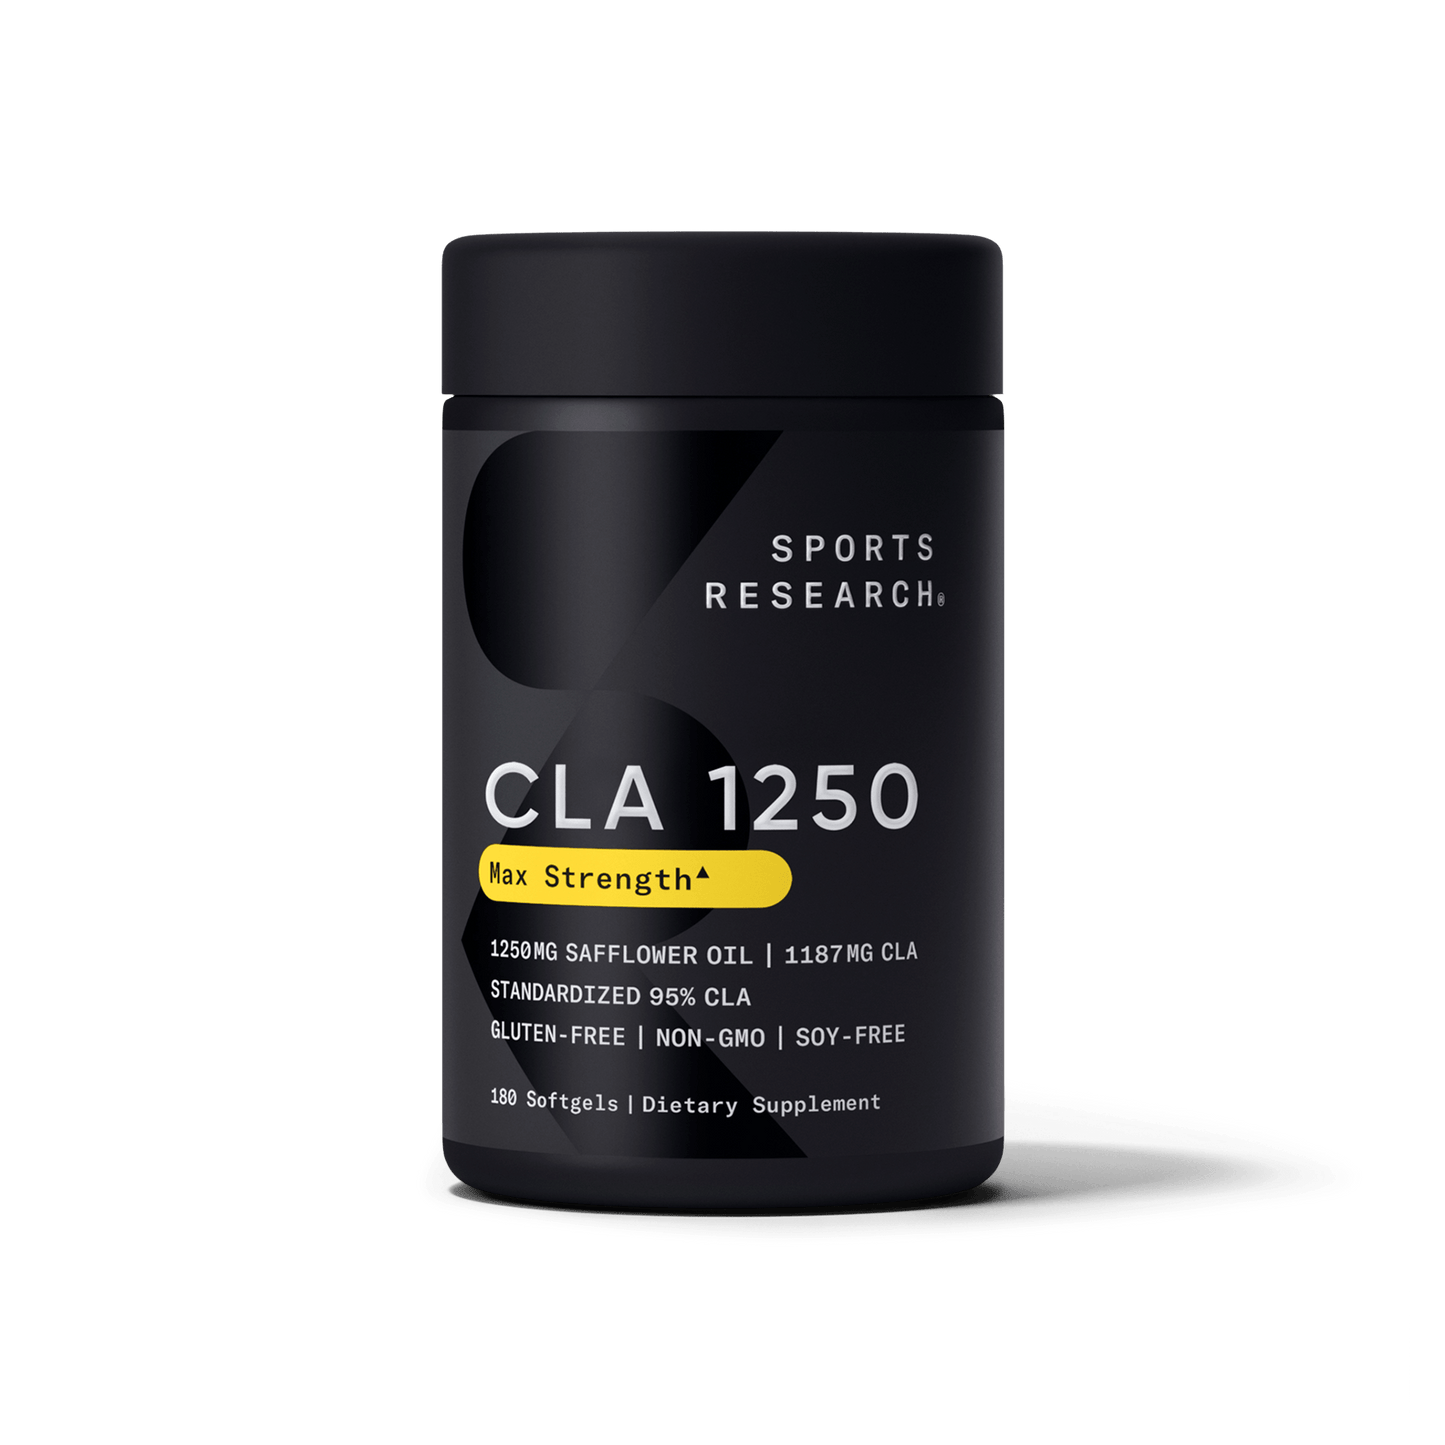 Sports Research Max Potency CLA 1250.